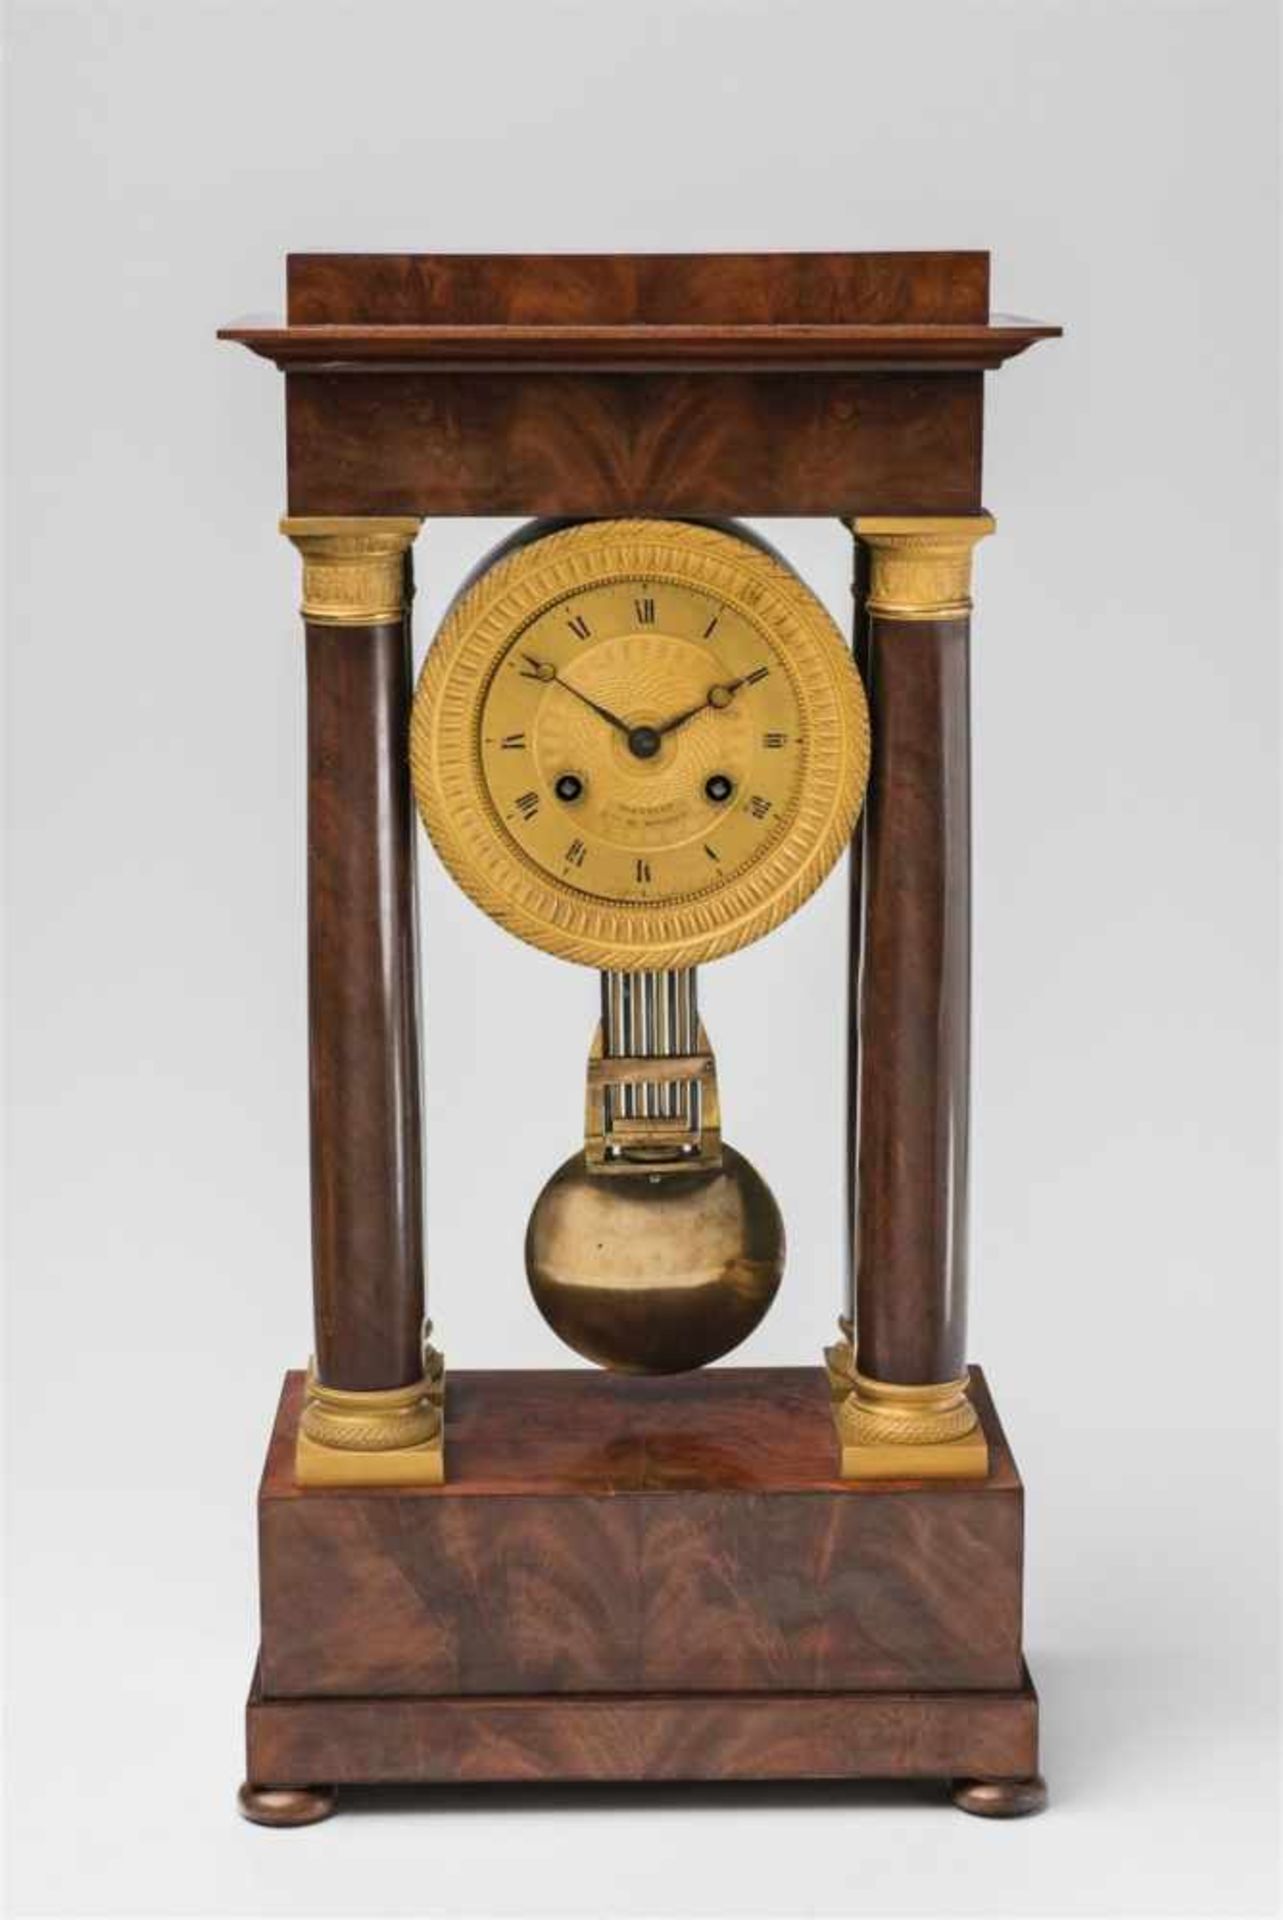 A French portico pendulum clockMahogany veneer on softwood, guilloched brass. 14-day movement with